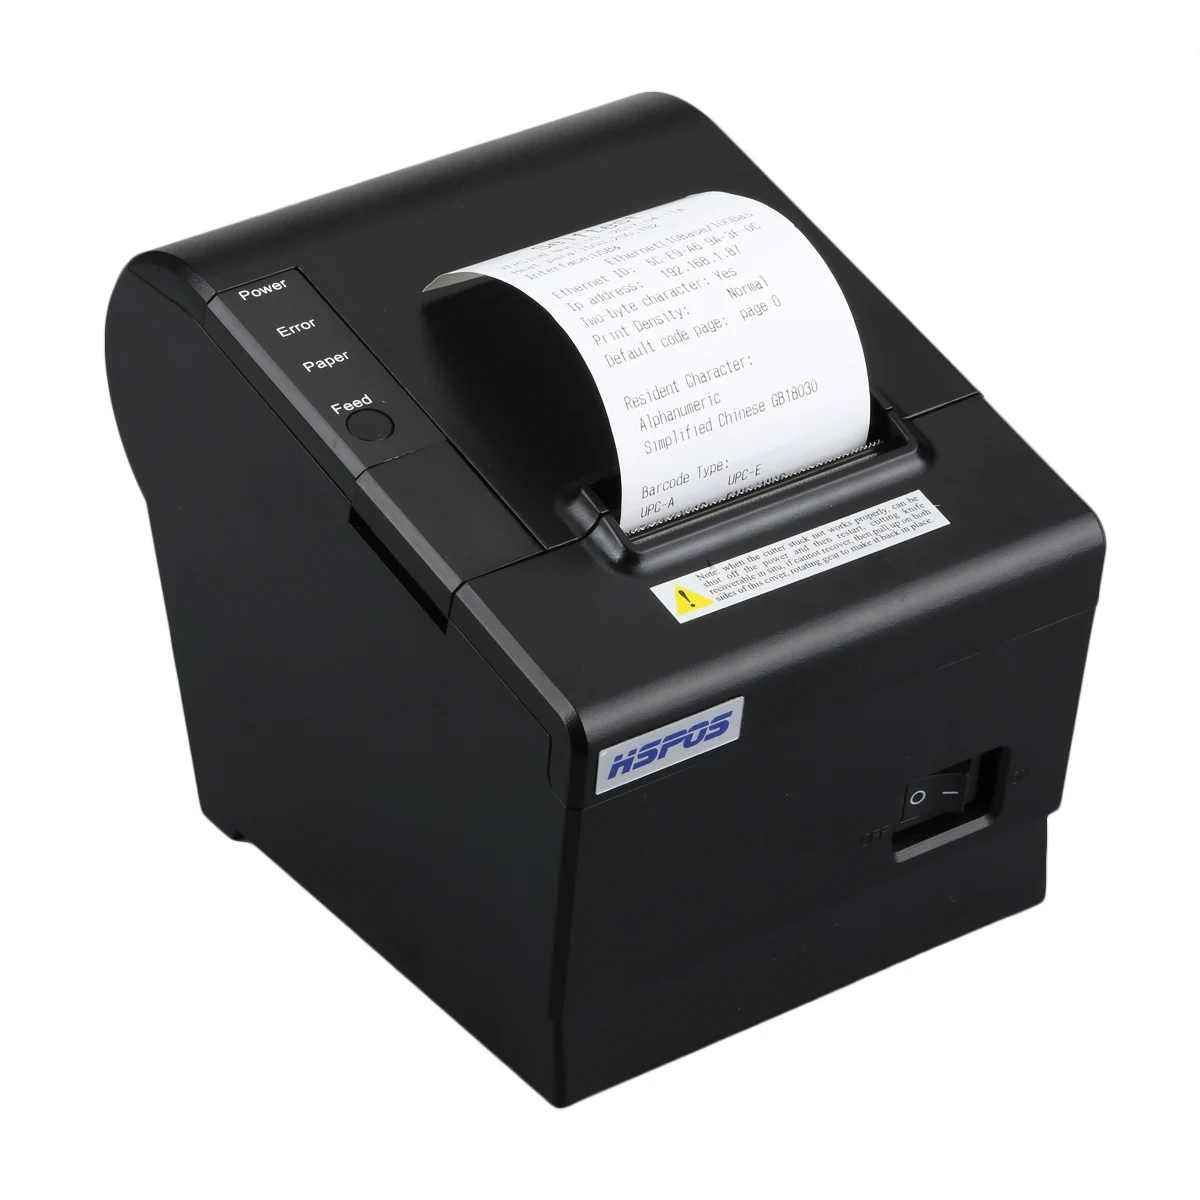 

HS-C58CULWG 58MM Thermal Receipt Printer USB lan WiFi gprs with cutter POS systems support Windows android linux with driver